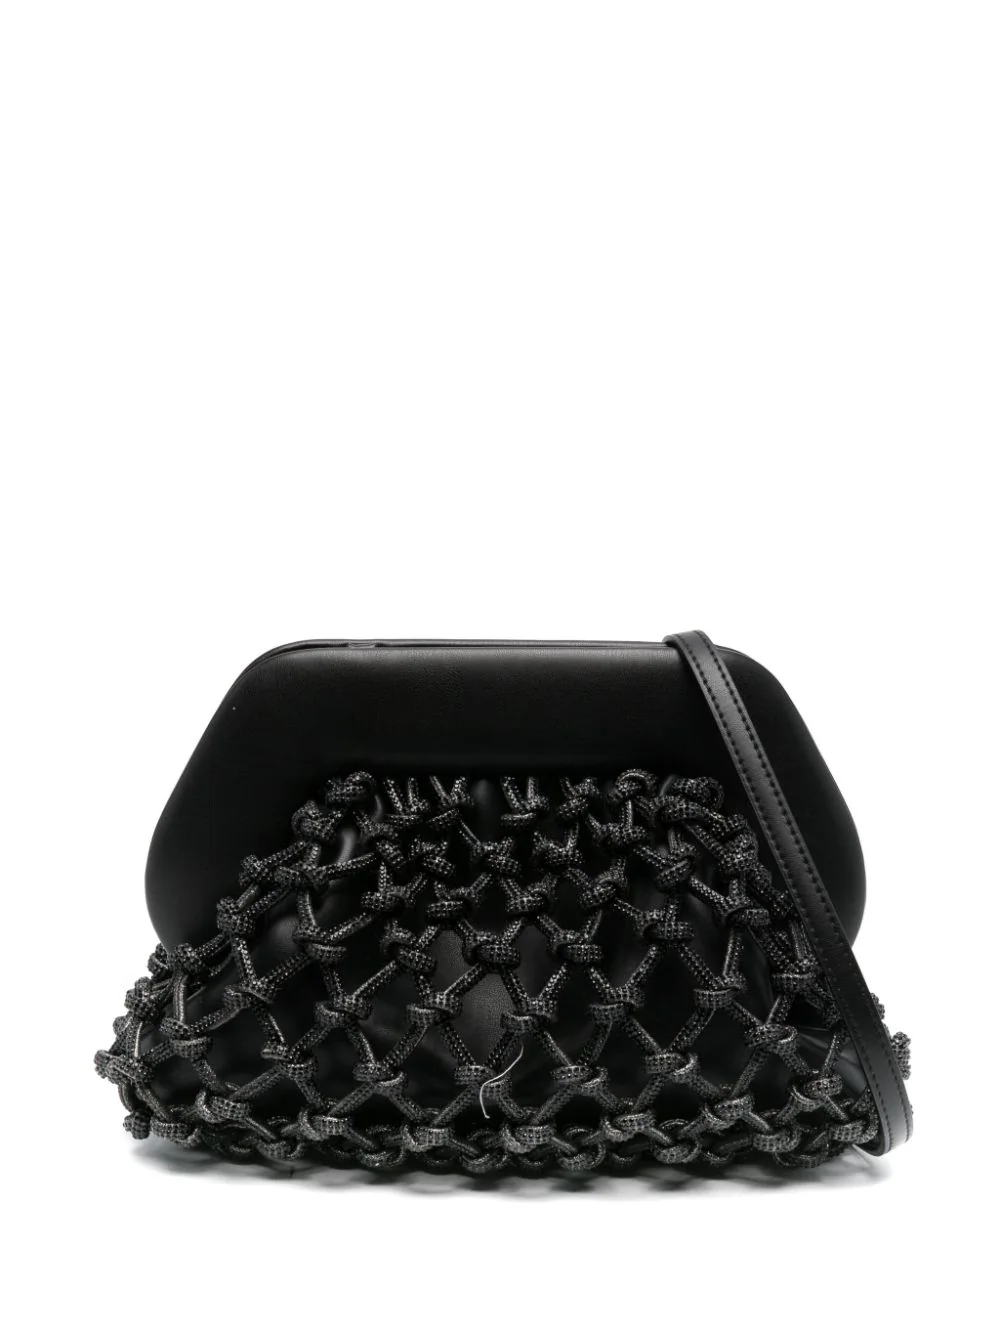 Themoire' Tia Clutch Bag Embellished With Rhinestones In Black